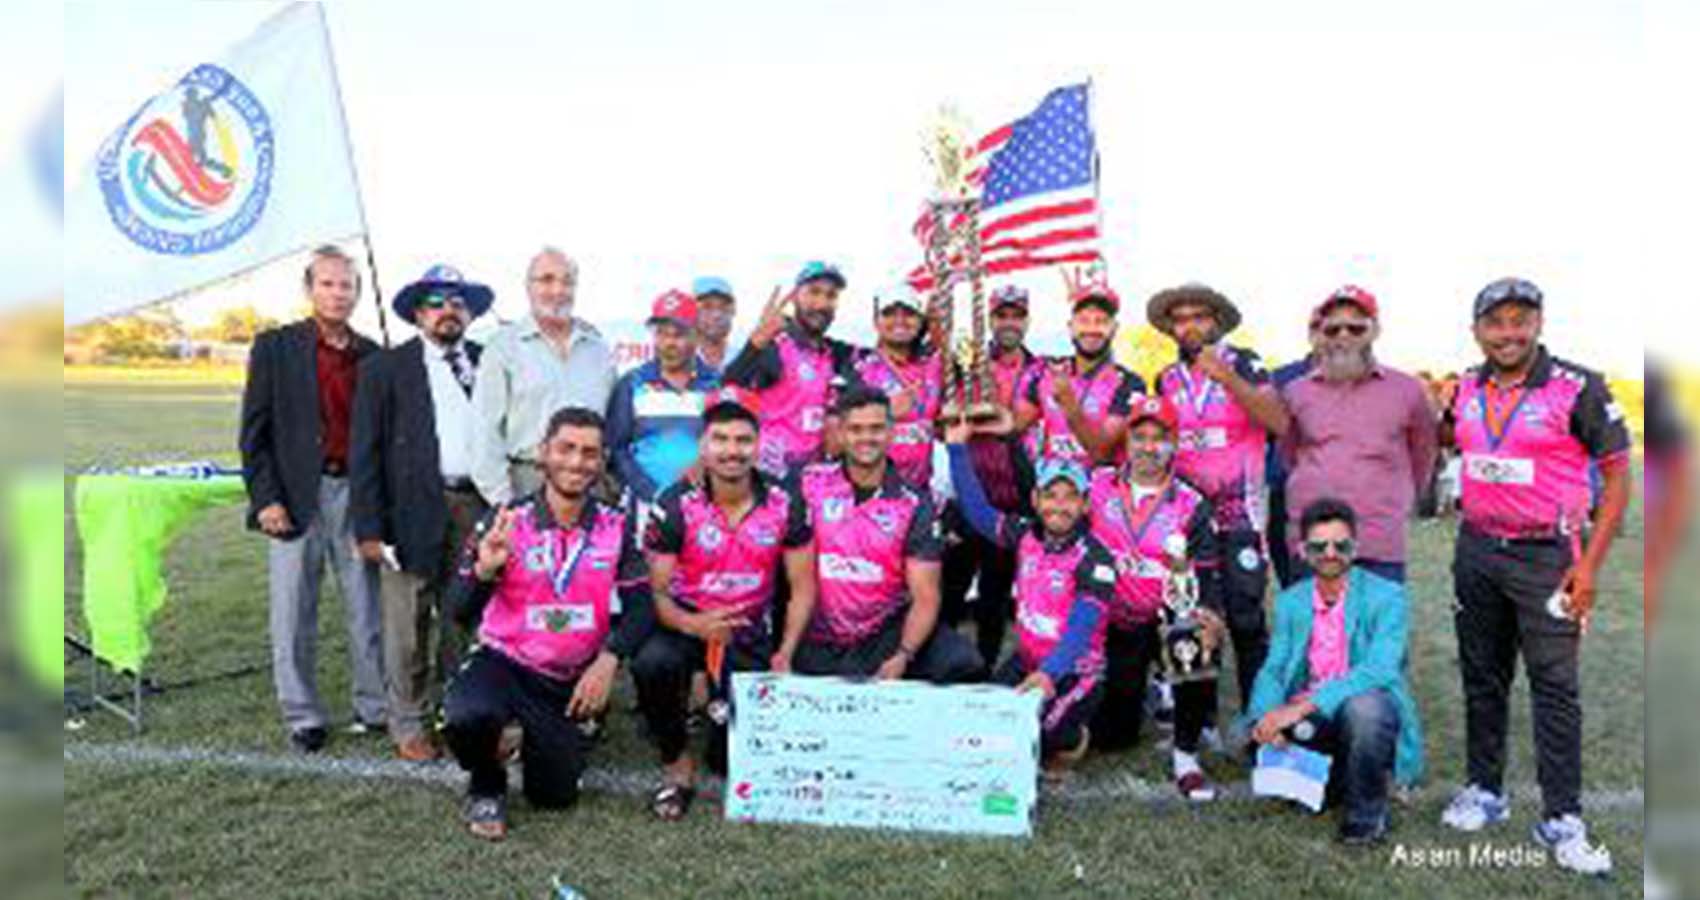 Midwest Cc Club Team Win At  UCL & E Chicago Gold Cup Tournament